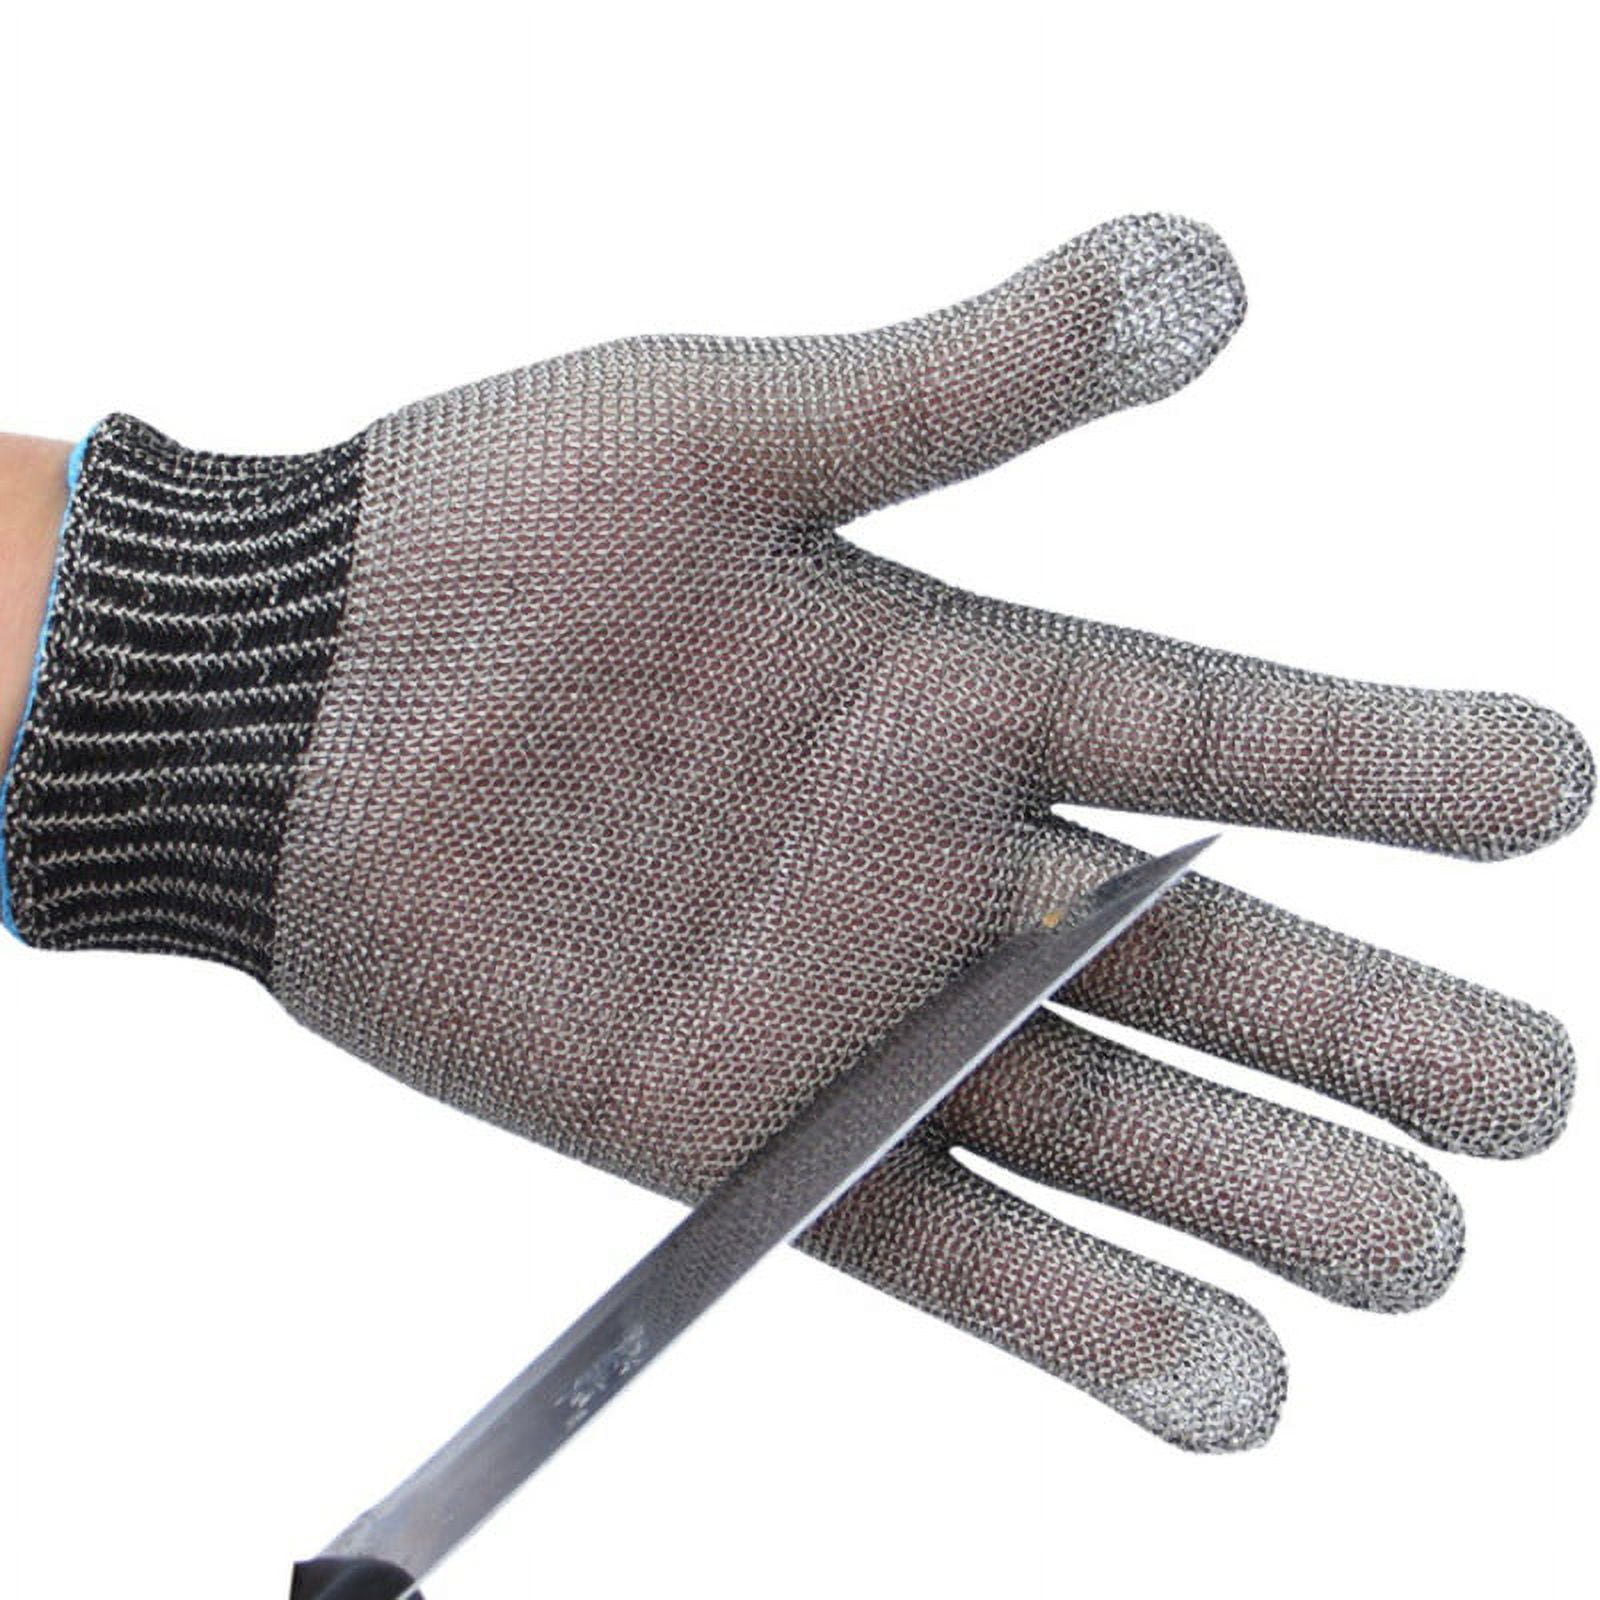 You Need a Mandoline, But Also a Cut-Proof Glove